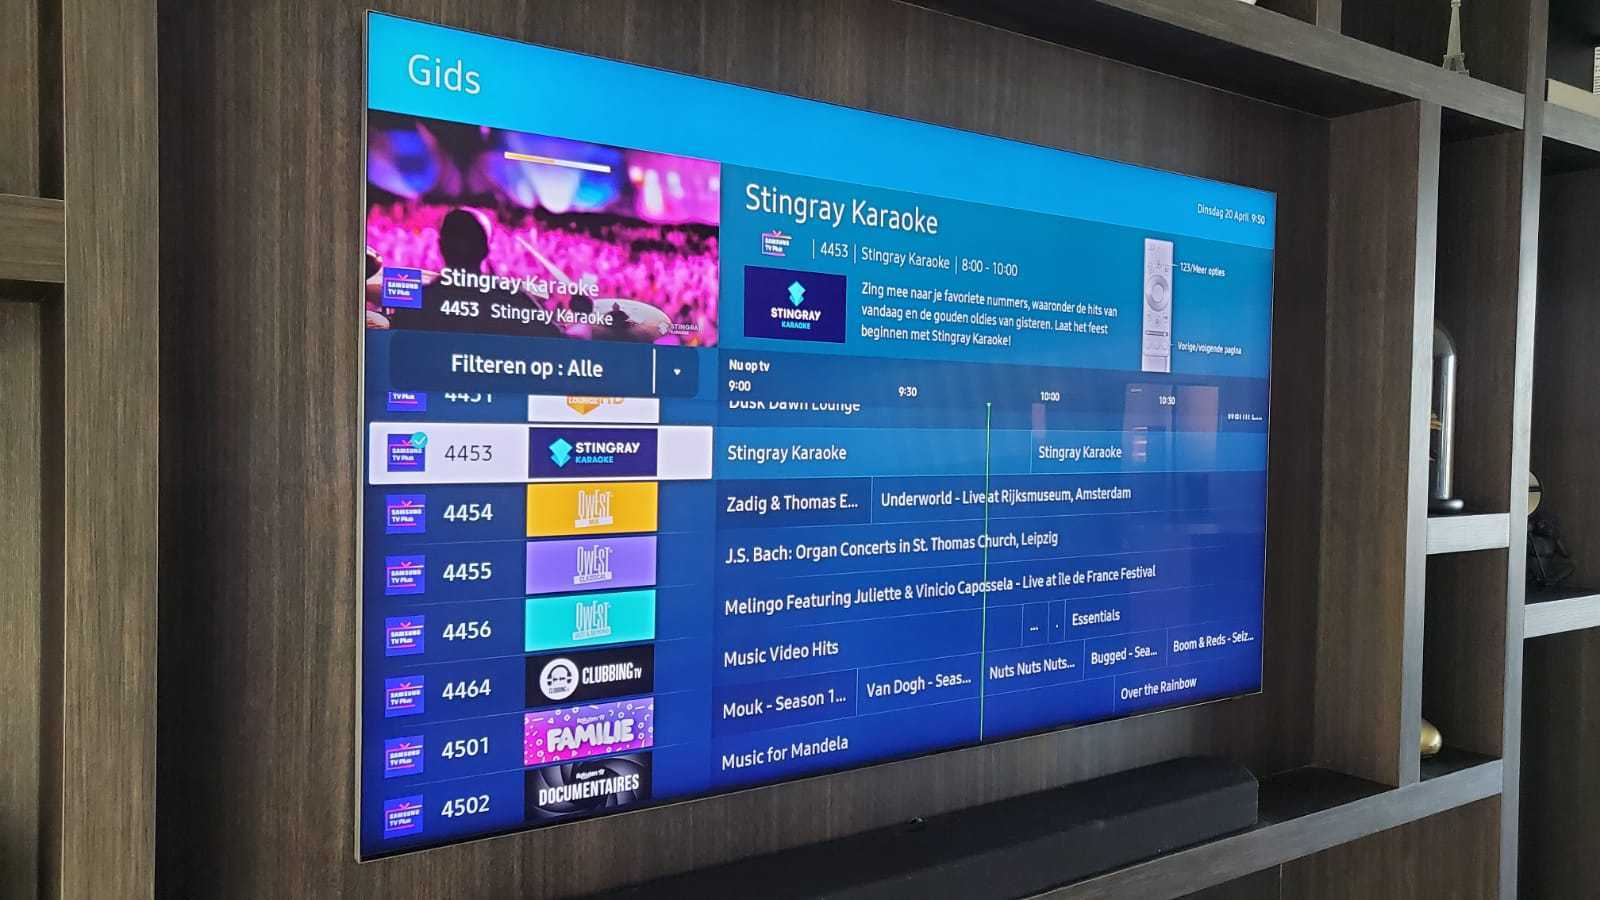 Samsung Tv Plus Is Now Available In The Netherlands Sammobile